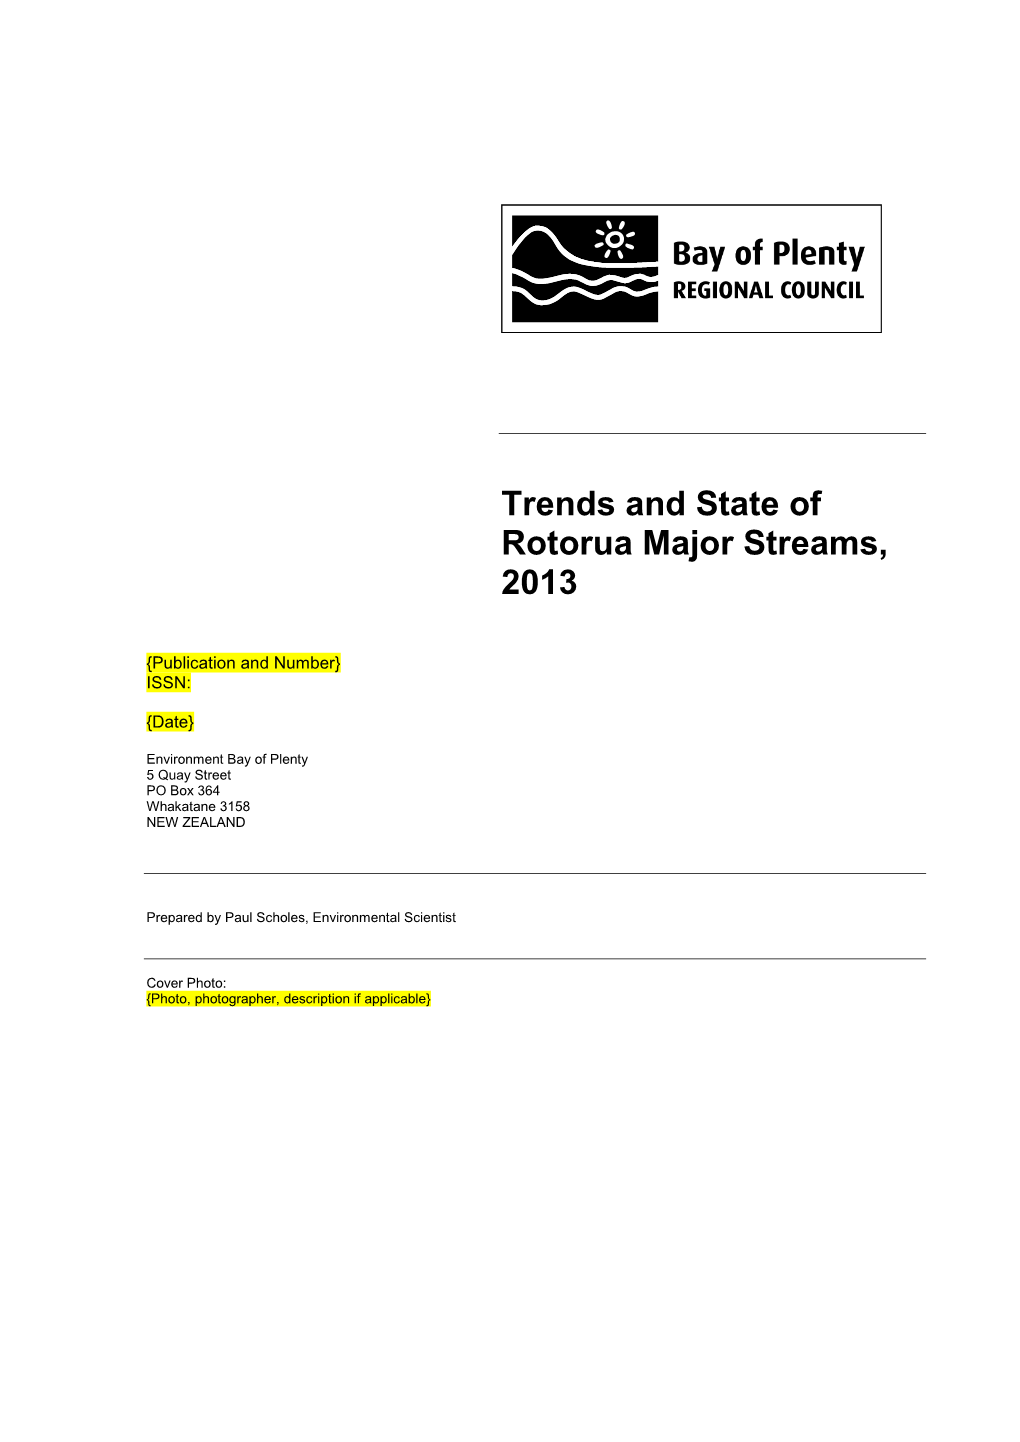 Trends and State of Rotorua Major Streams, 2013